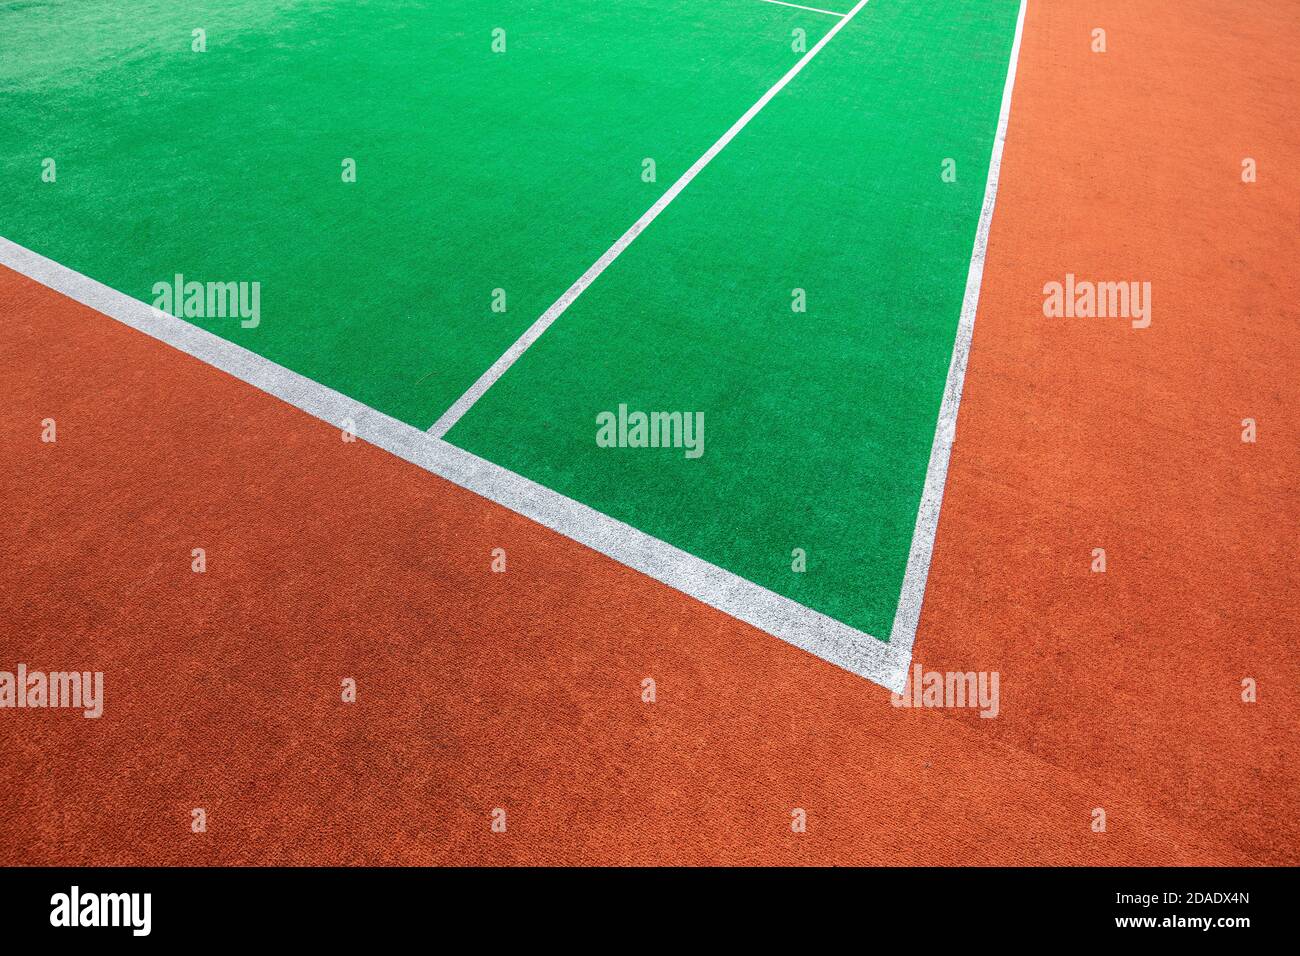 Tennis clay court. Tennis courts making an interesting pattern. Abstract summer outdoor sport, recreational background, tennis court in a sunny day Stock Photo